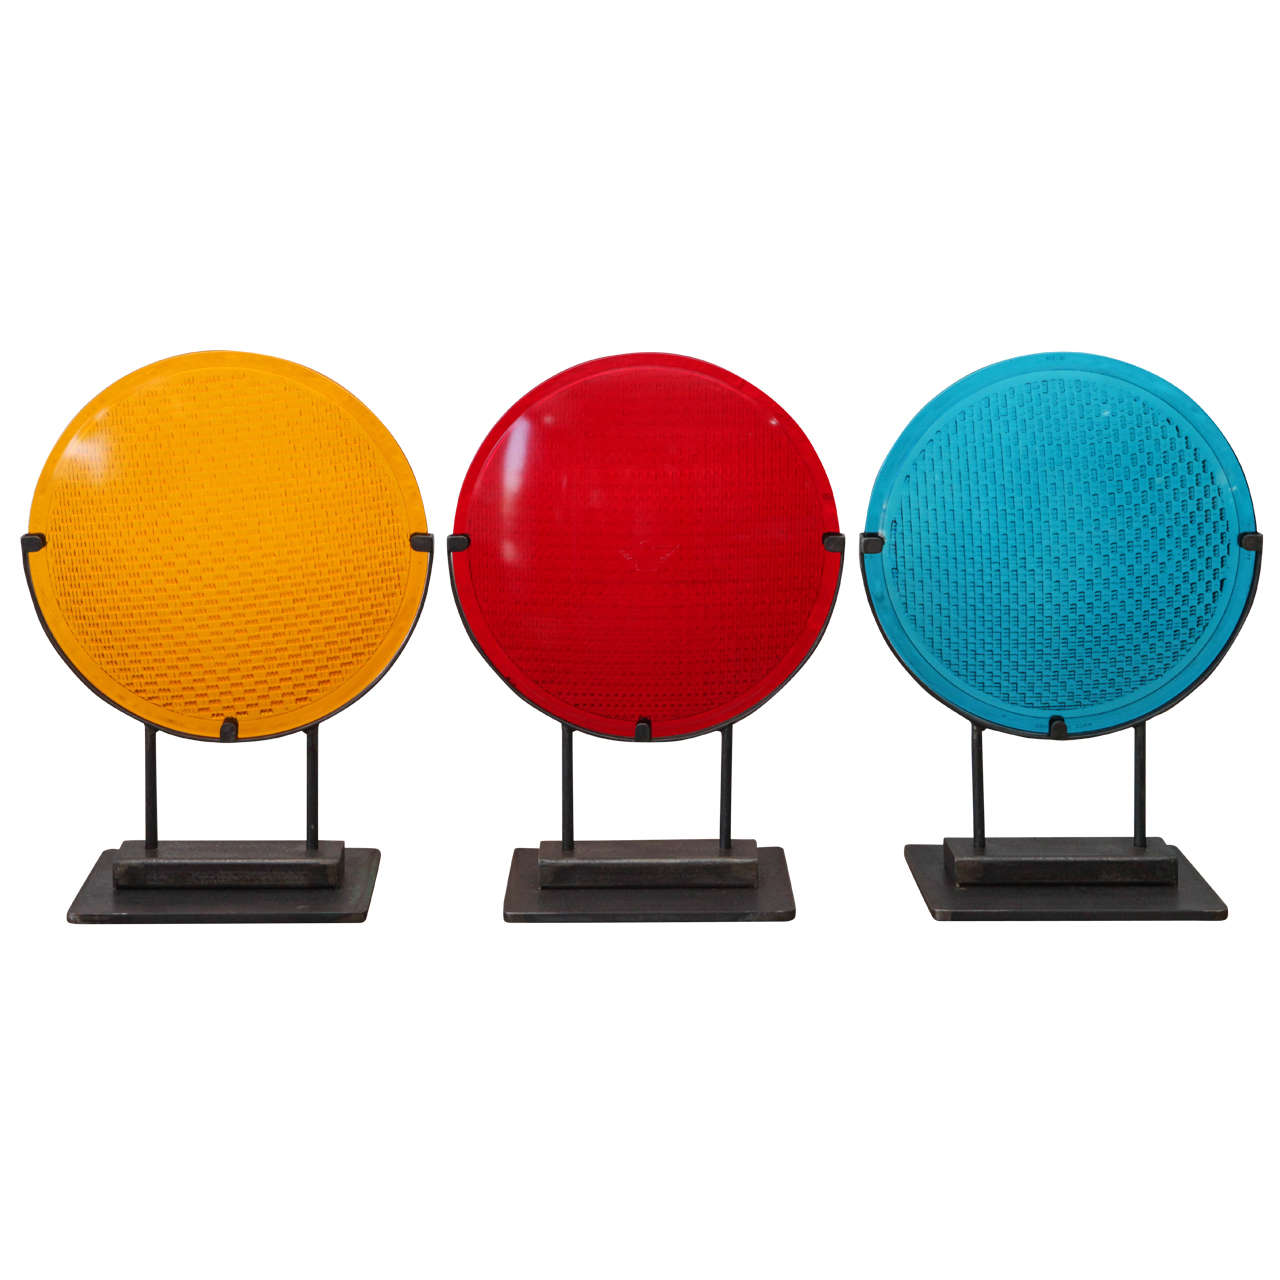 Three Colored Railroad Signal Lens Mounted on Steel Stands